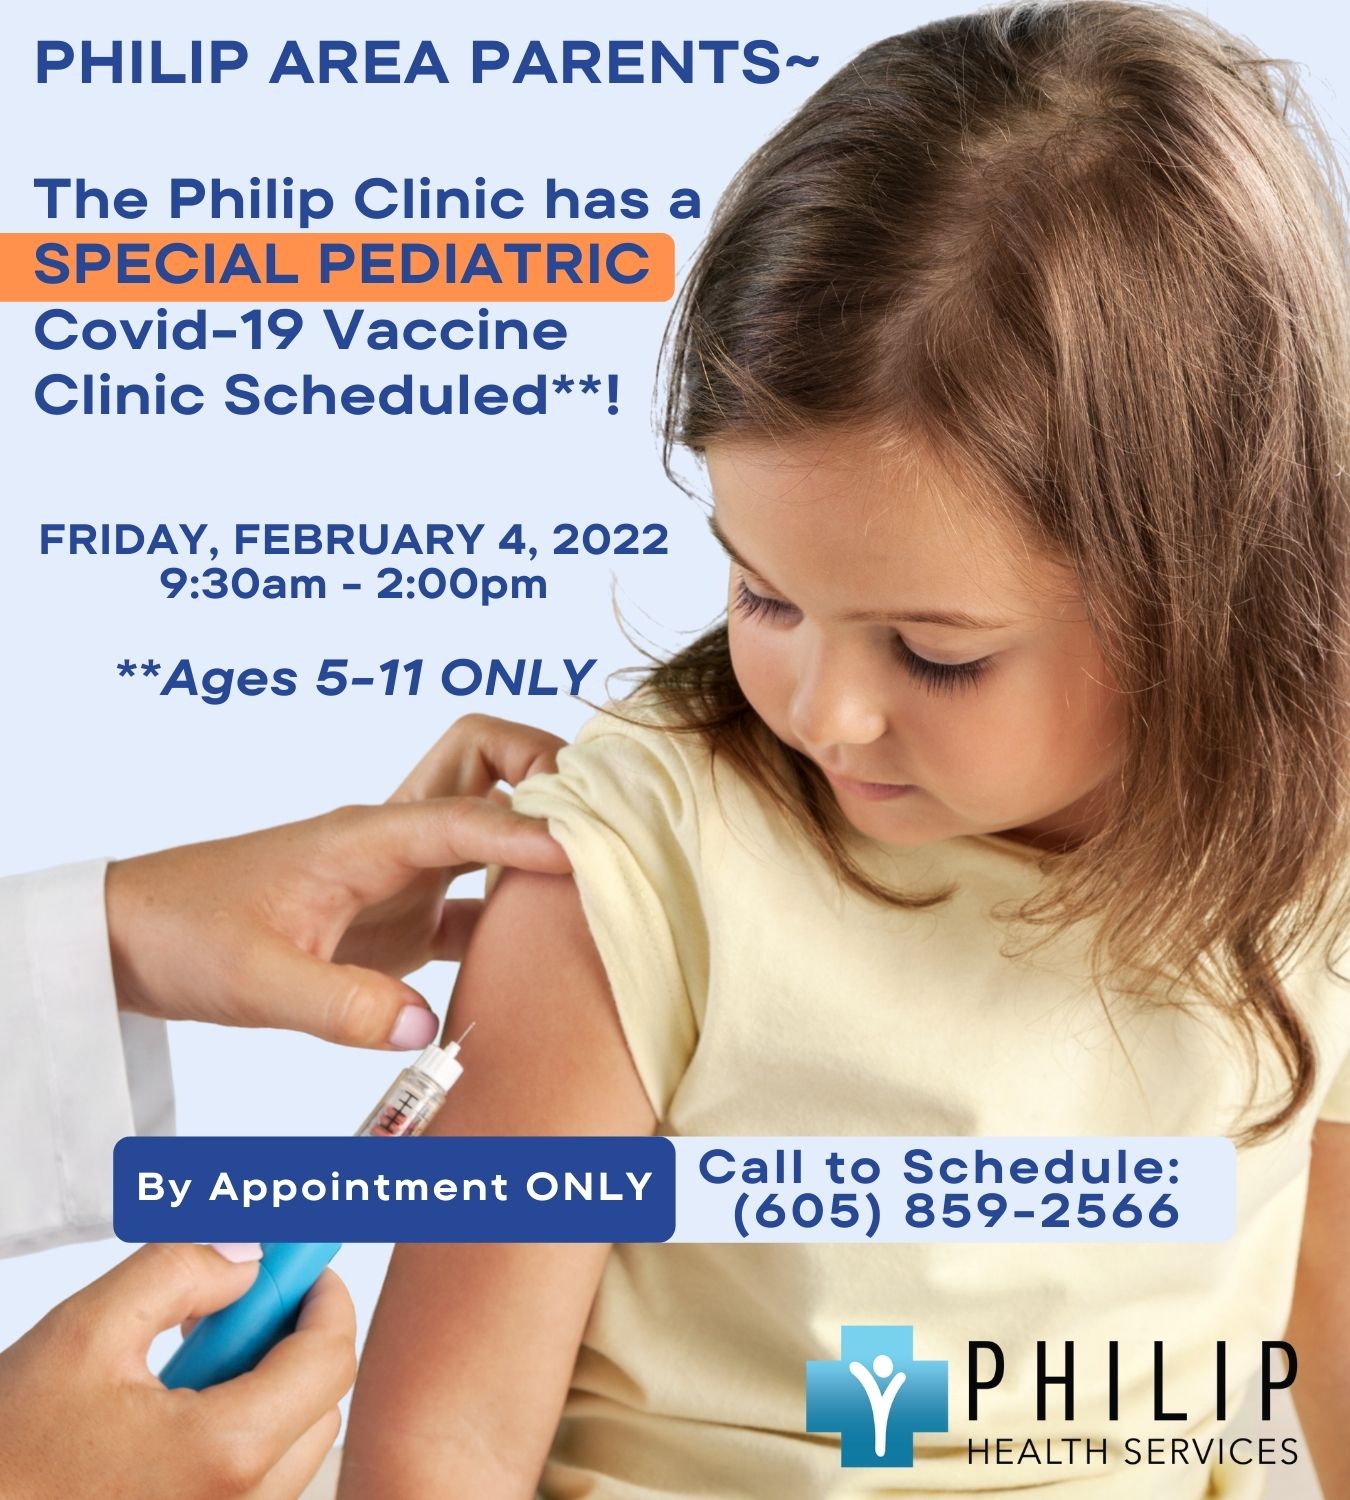 Special Pediatric Covid Clinic Scheduled (ages 5-11).  **Appointment Required